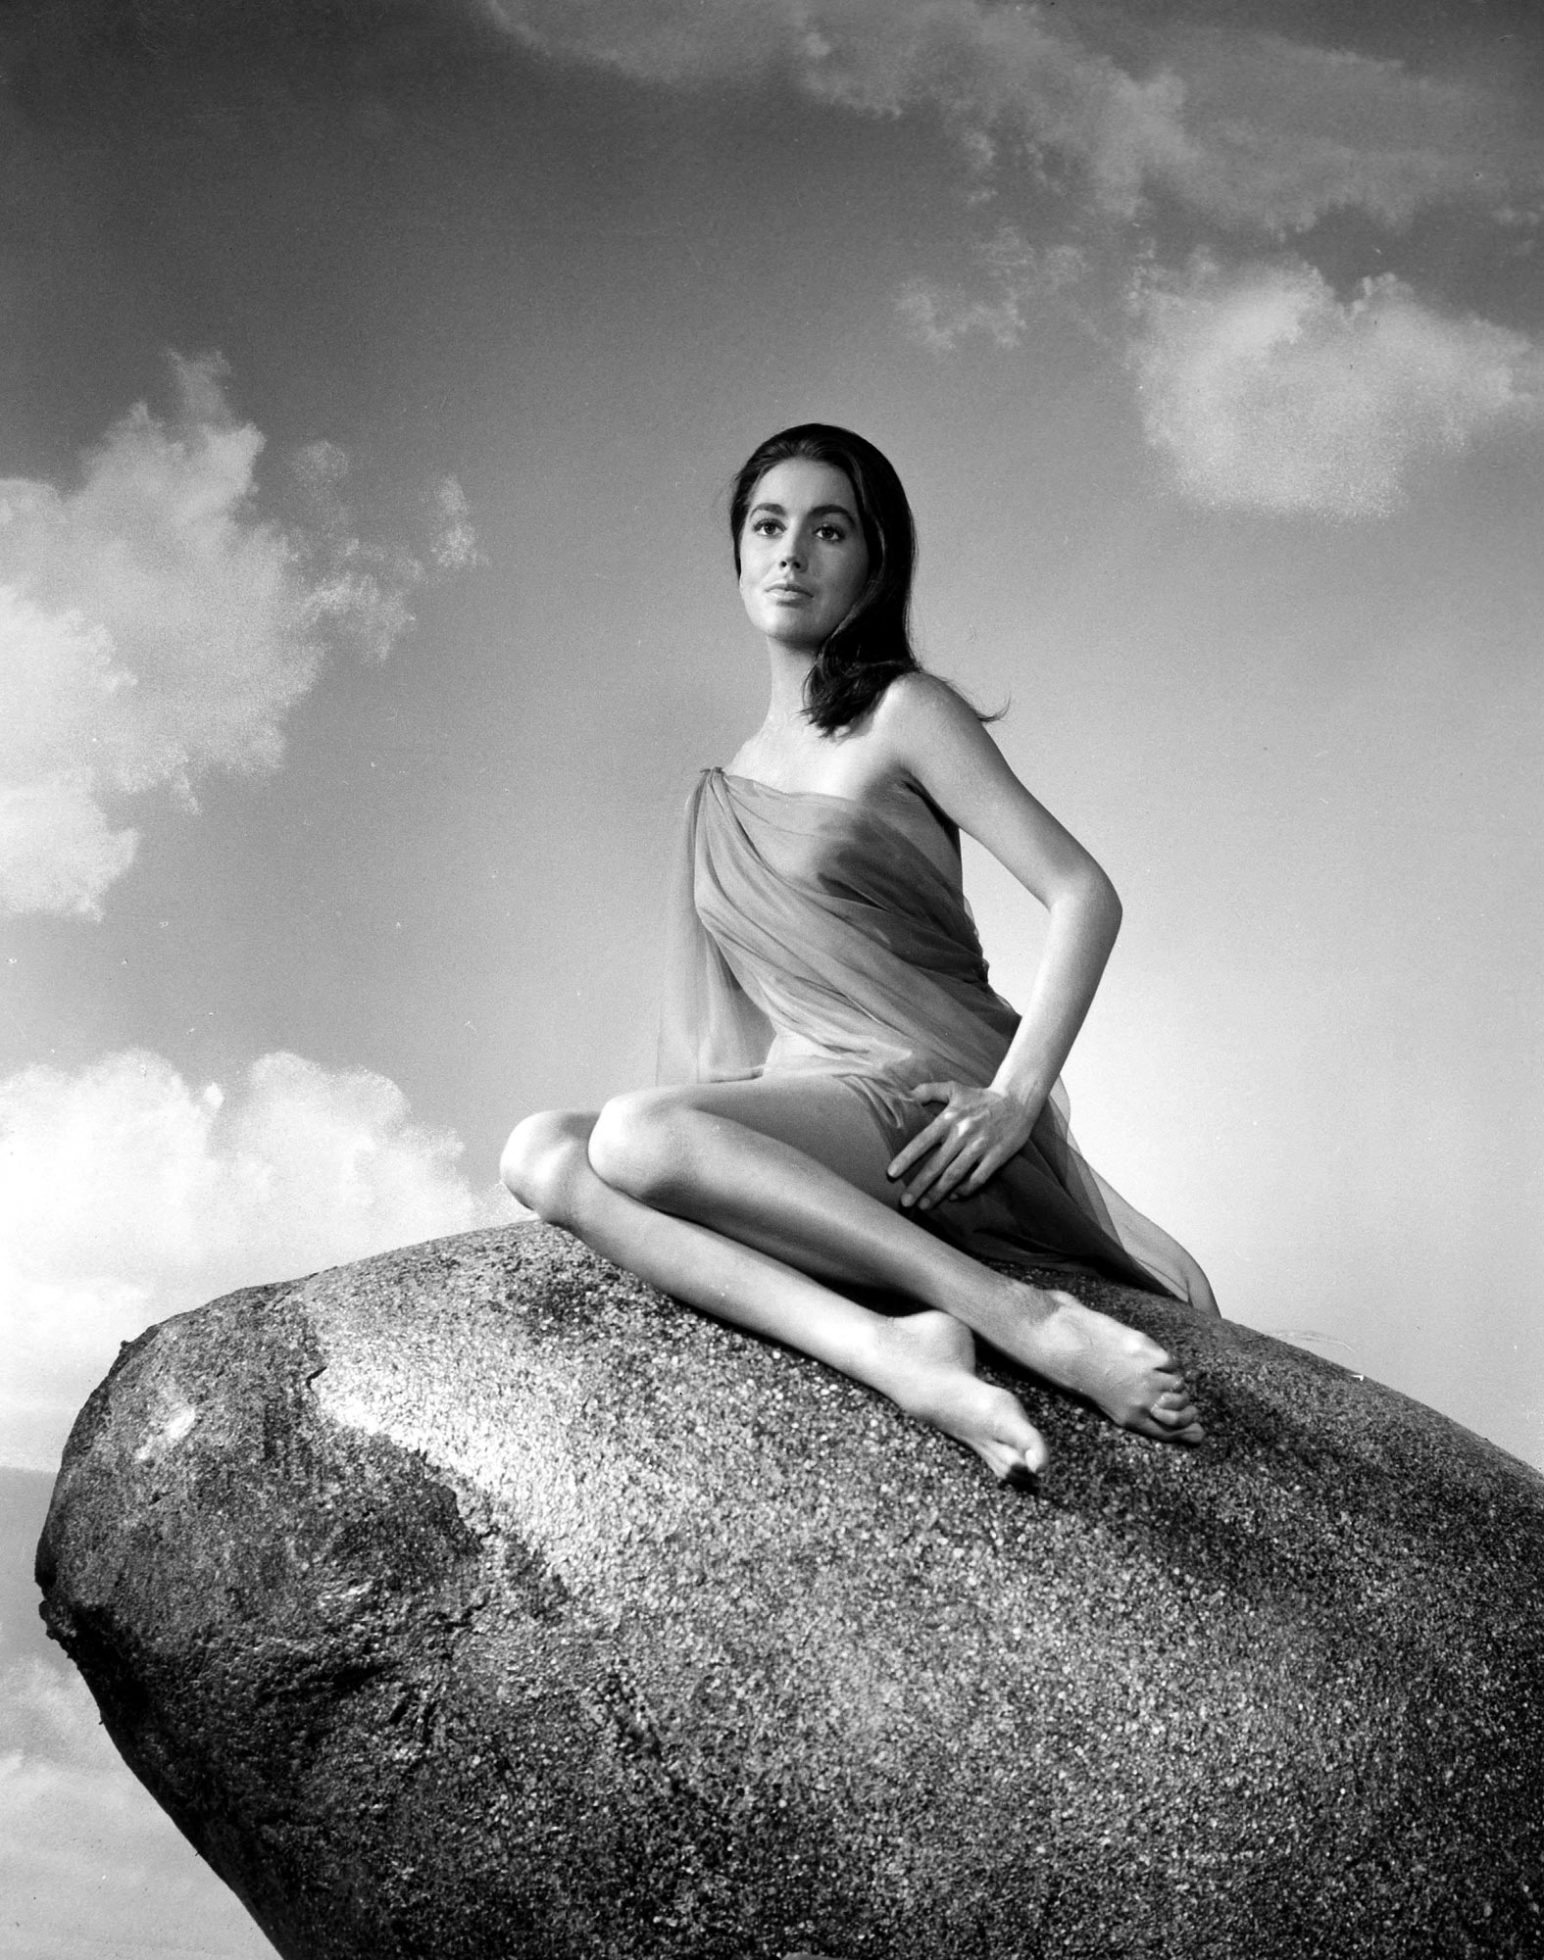 Linda Harrison Planet of the Apes, 1968.